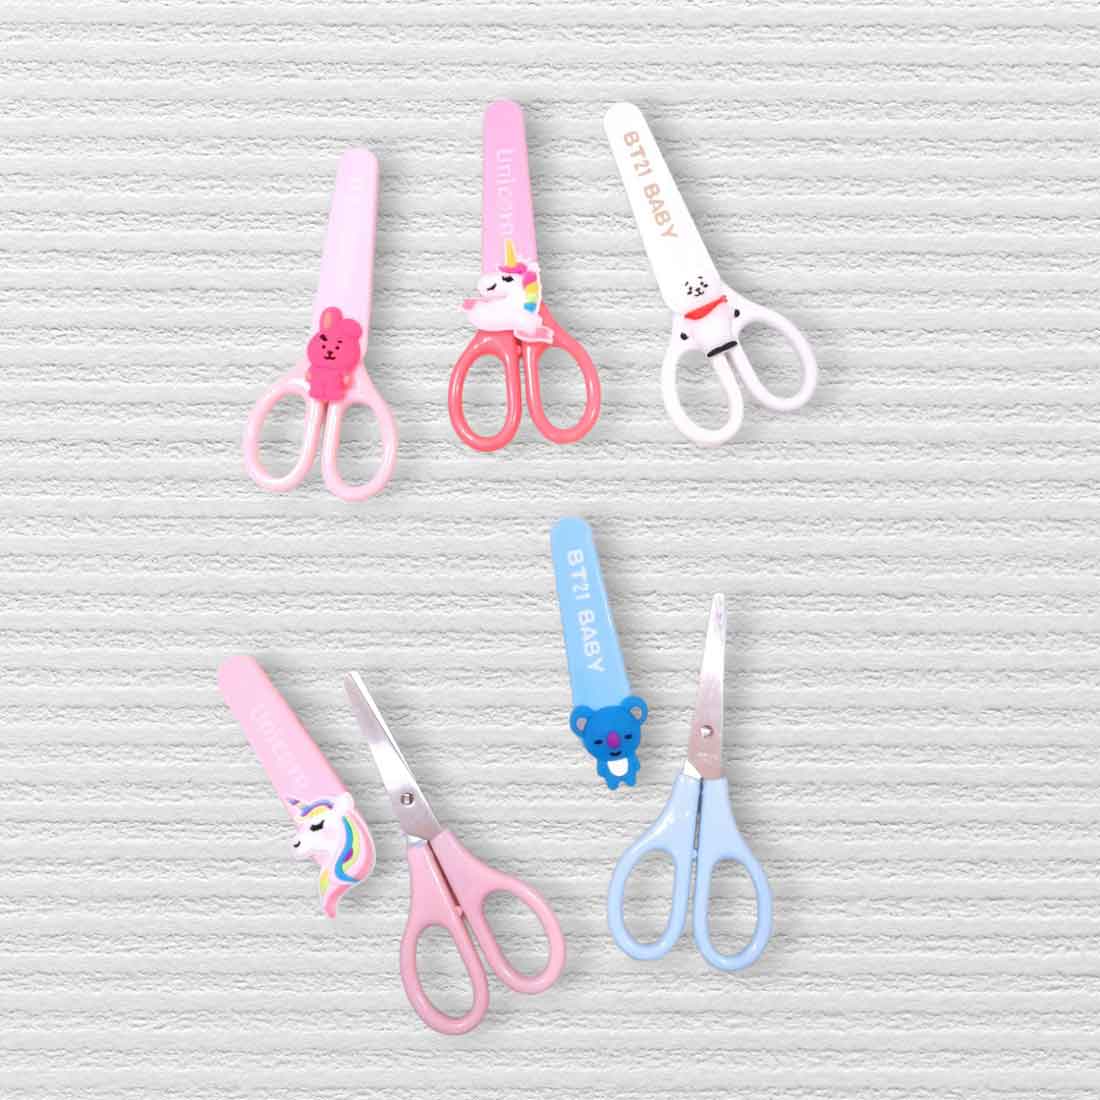 Unicorn Scissors with Cover | Kids-Friendly Craft Scissors in Assorted Colors – for School, Art and Craft (Pack of 3)